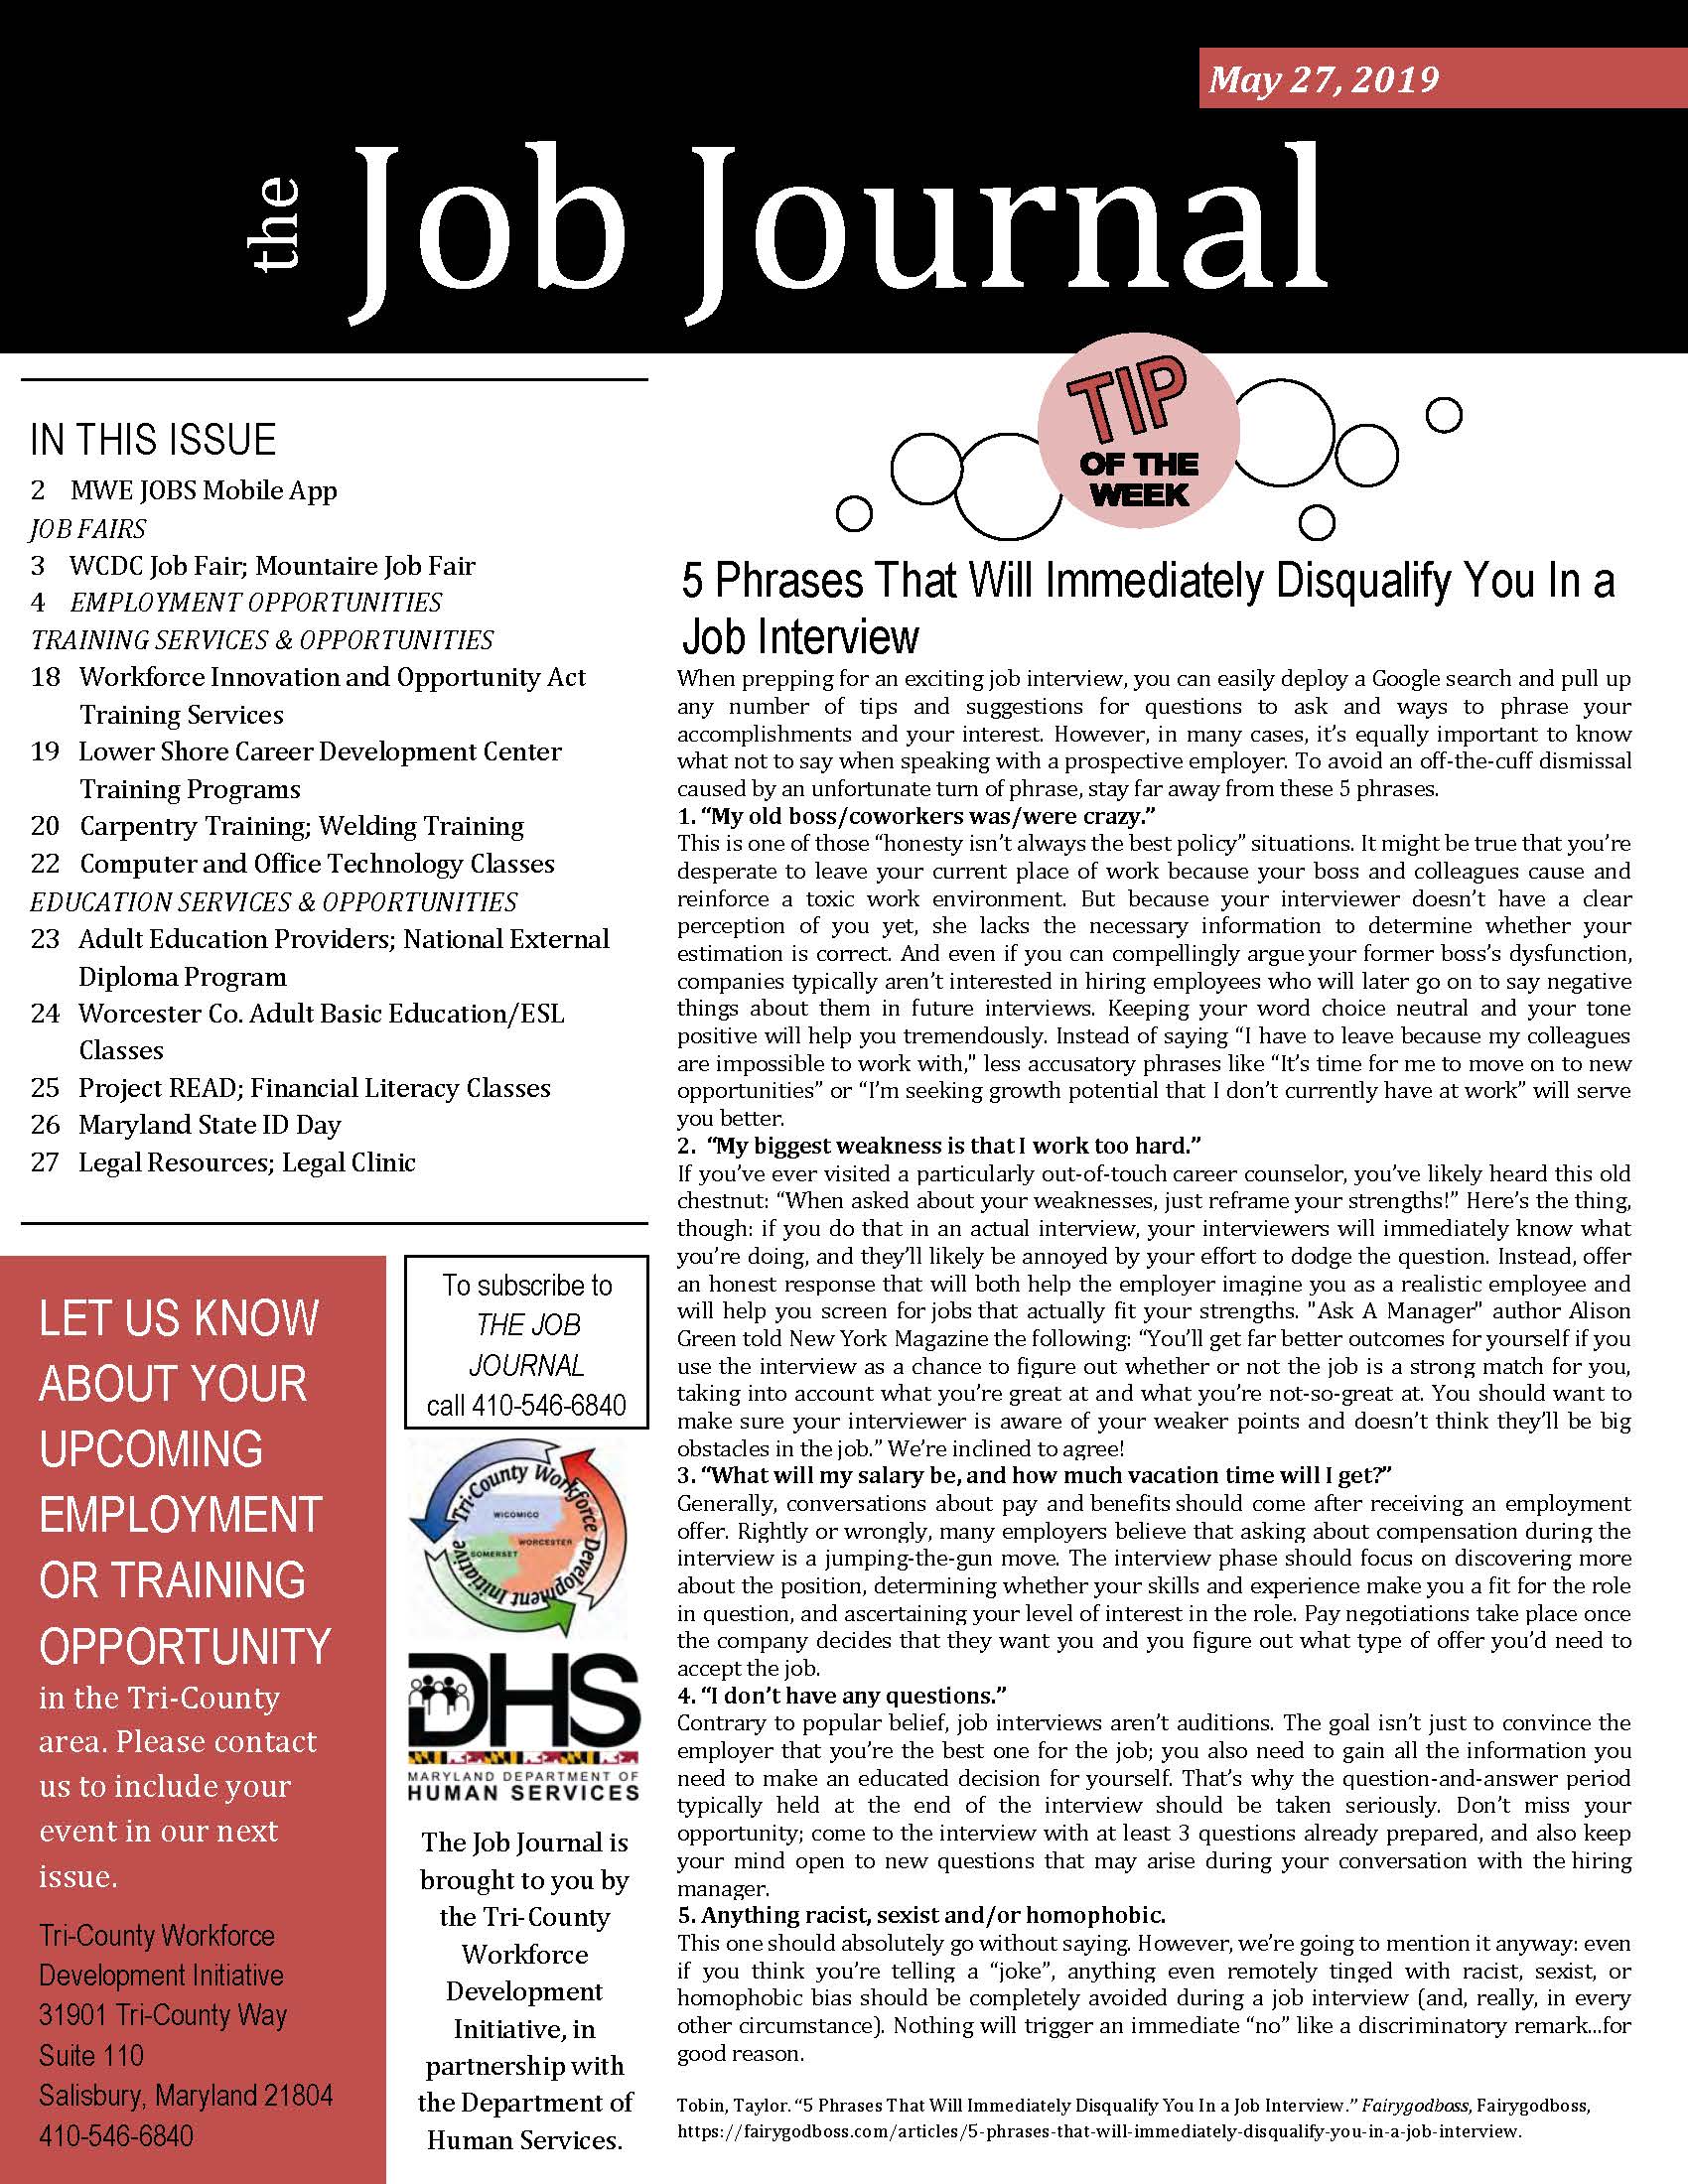 Cover page of The Job Journal for 05.27.2019